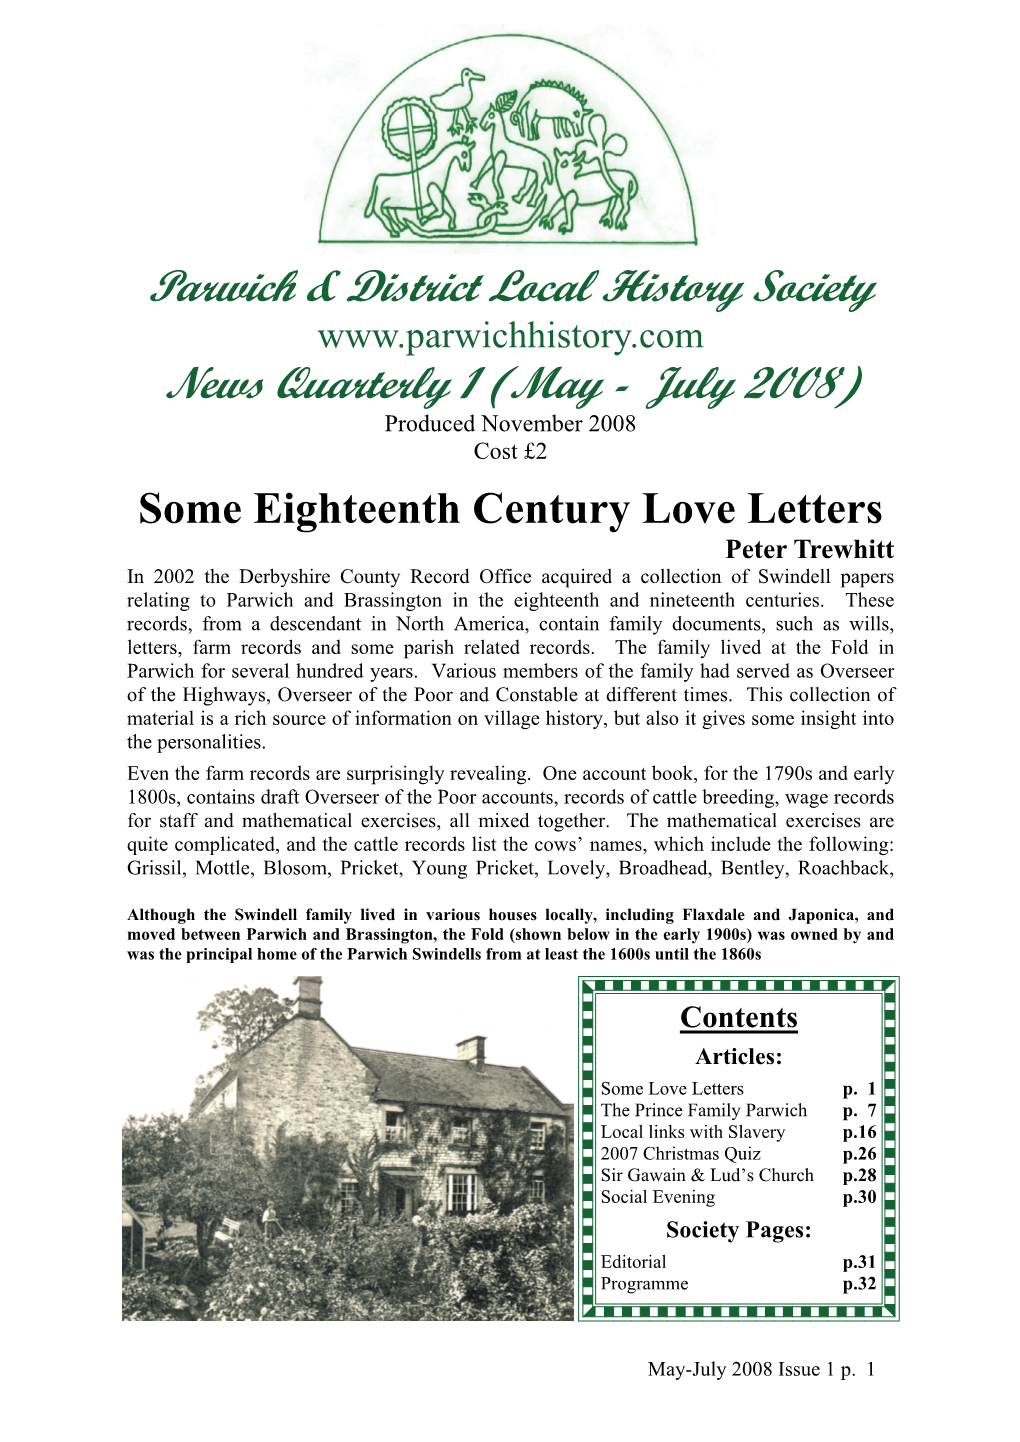 Parwich & District Local History Society News Quarterly 1 (May